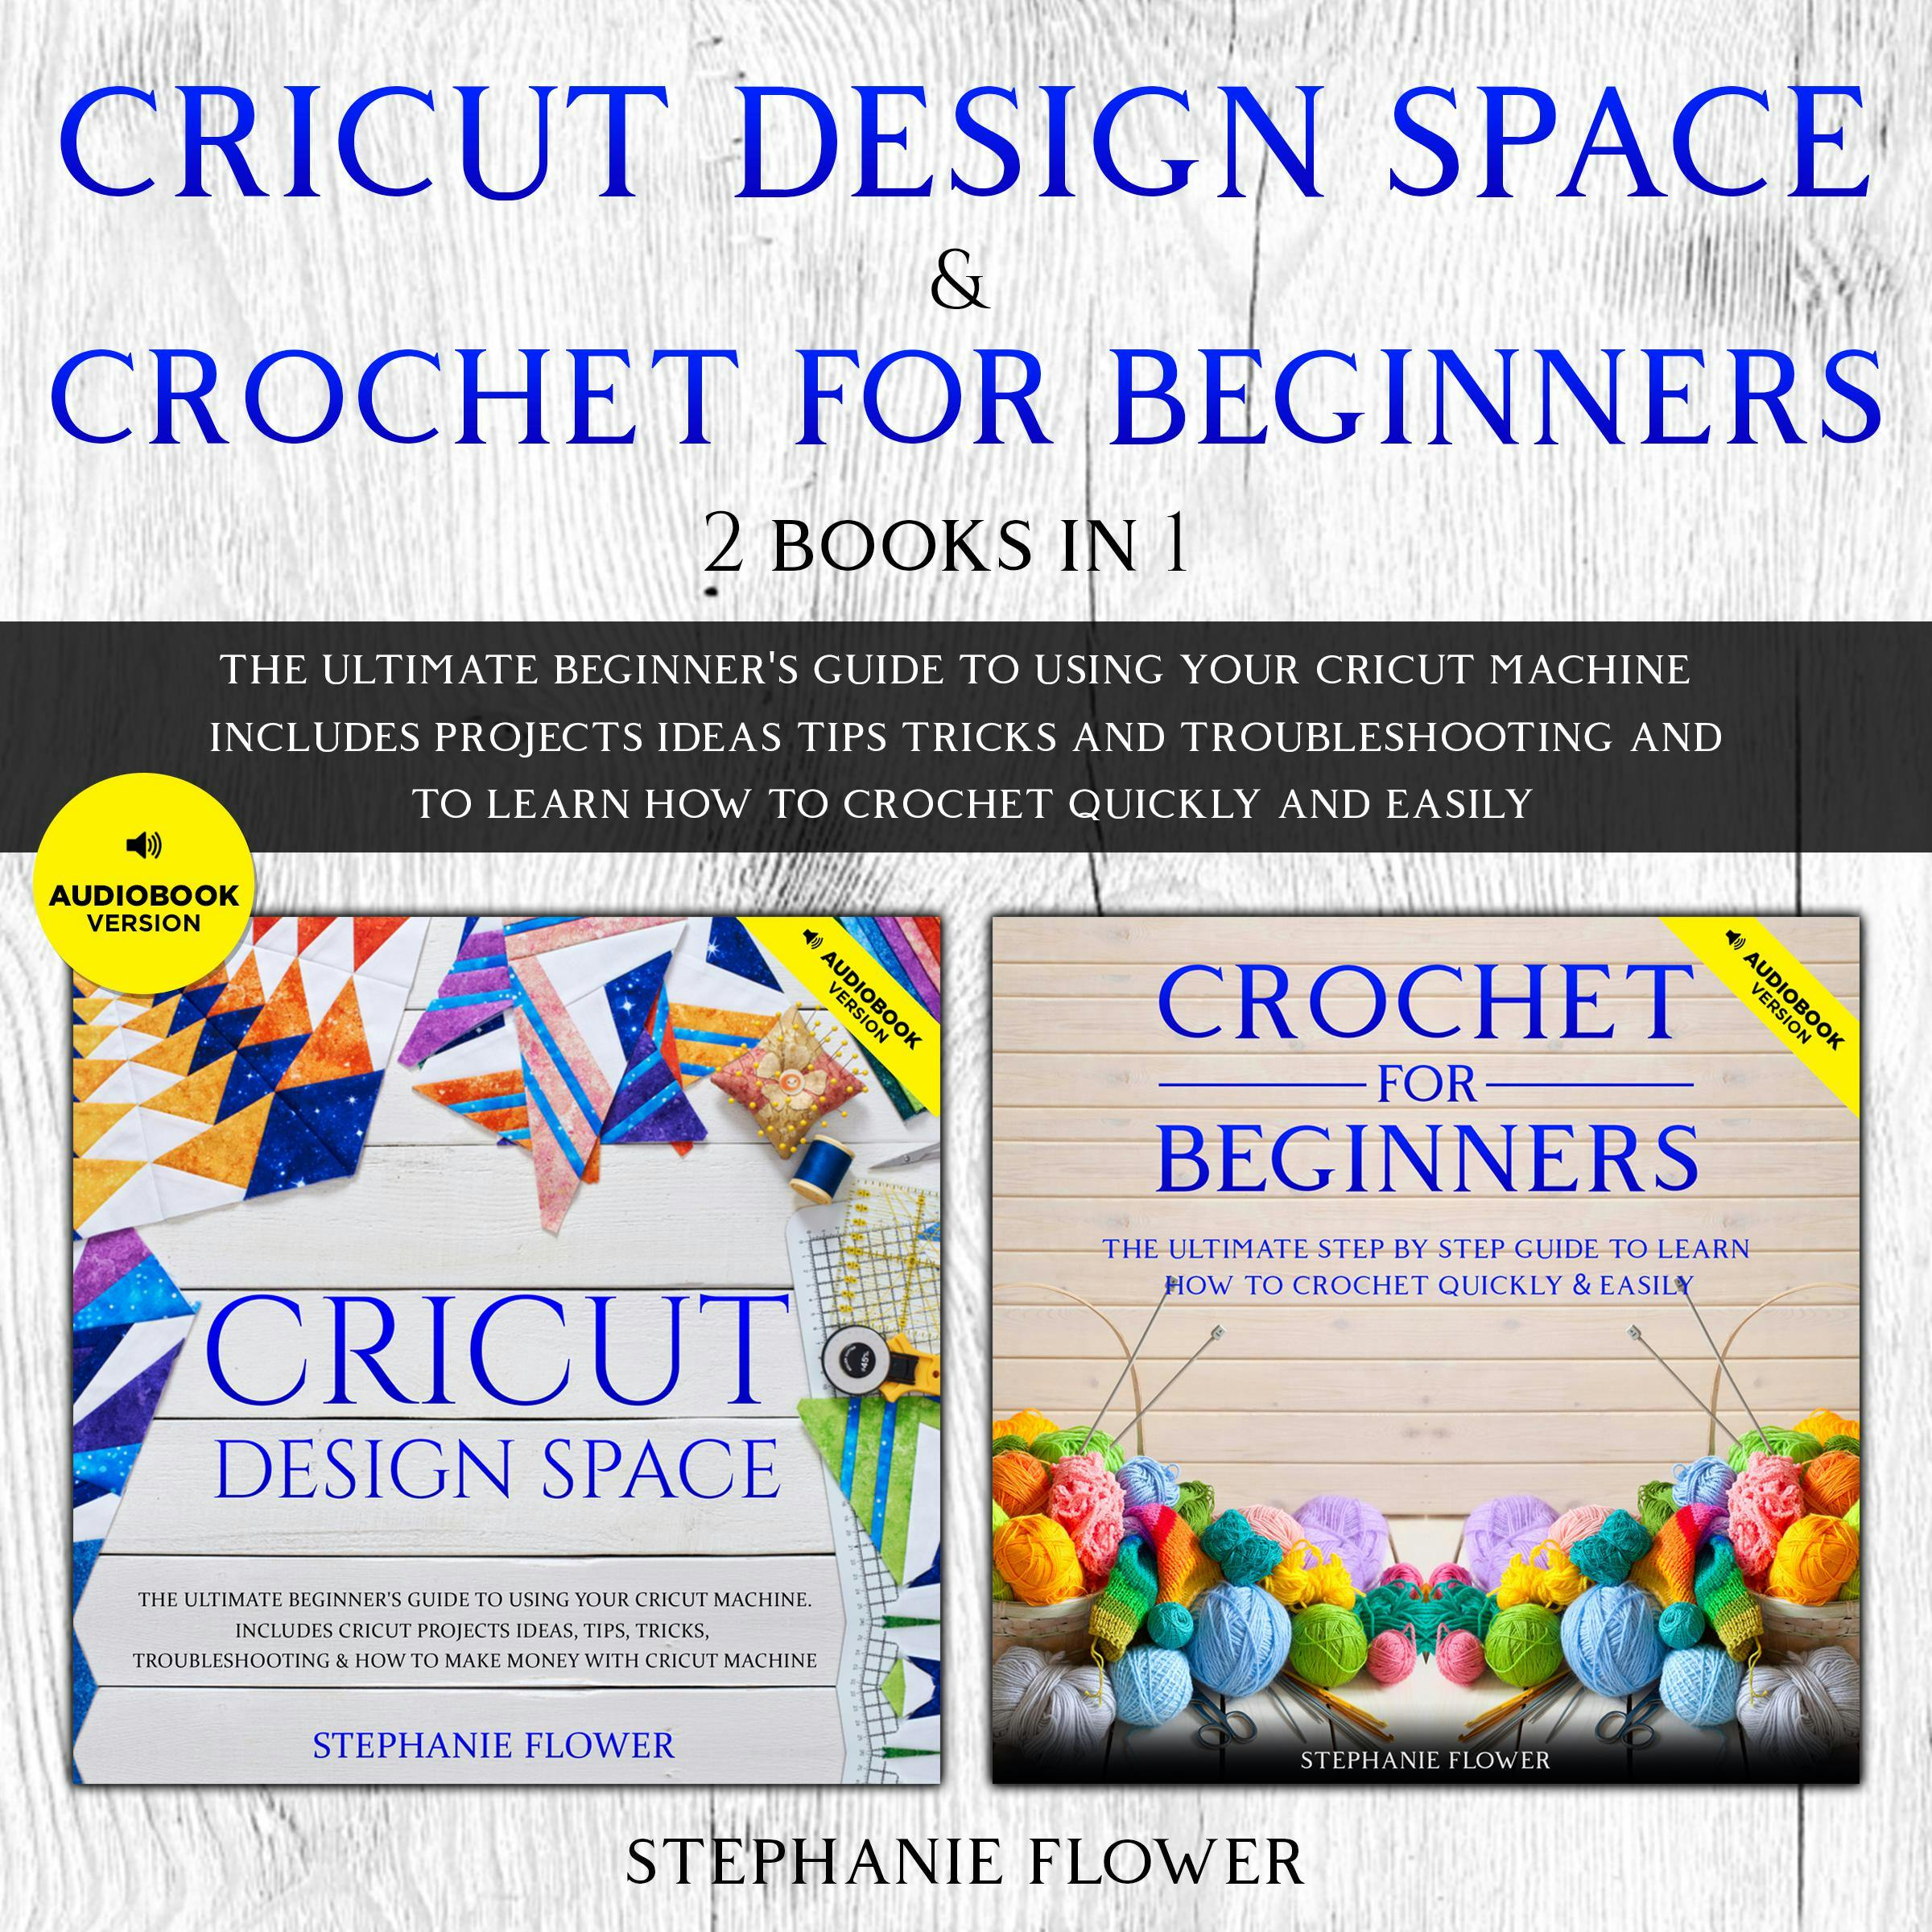 Cricut Design Space & Crochet For Beginners (2 Books In 1): The Ultimate  Beginner's Guide To Using Your Cricut Machine And To Learn How To Crochet  Quickly And Easily, Äänikirja, Stephanie Flower